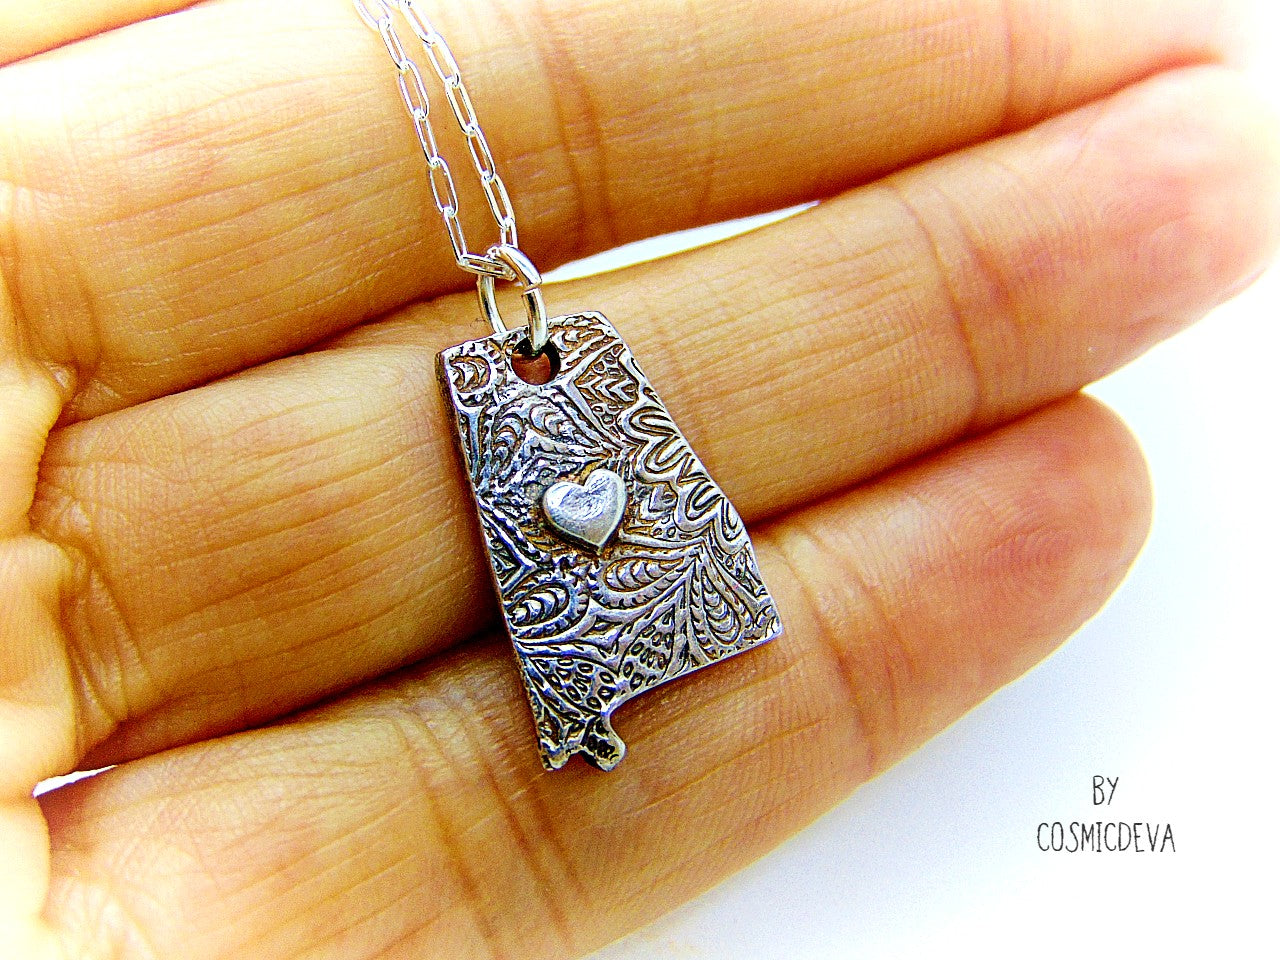 Shine your love for Alabama with this stunningly handcrafted and kiln-fired sterling silver necklace, featuring a delicate Alabama-shaped pendant with a heart in the center. Show off your state pride with a unique and fashionable piece of jewelry that is hallmarked as sterling silver and signed by CosmicDeva. Alabama love never looked so beautiful!